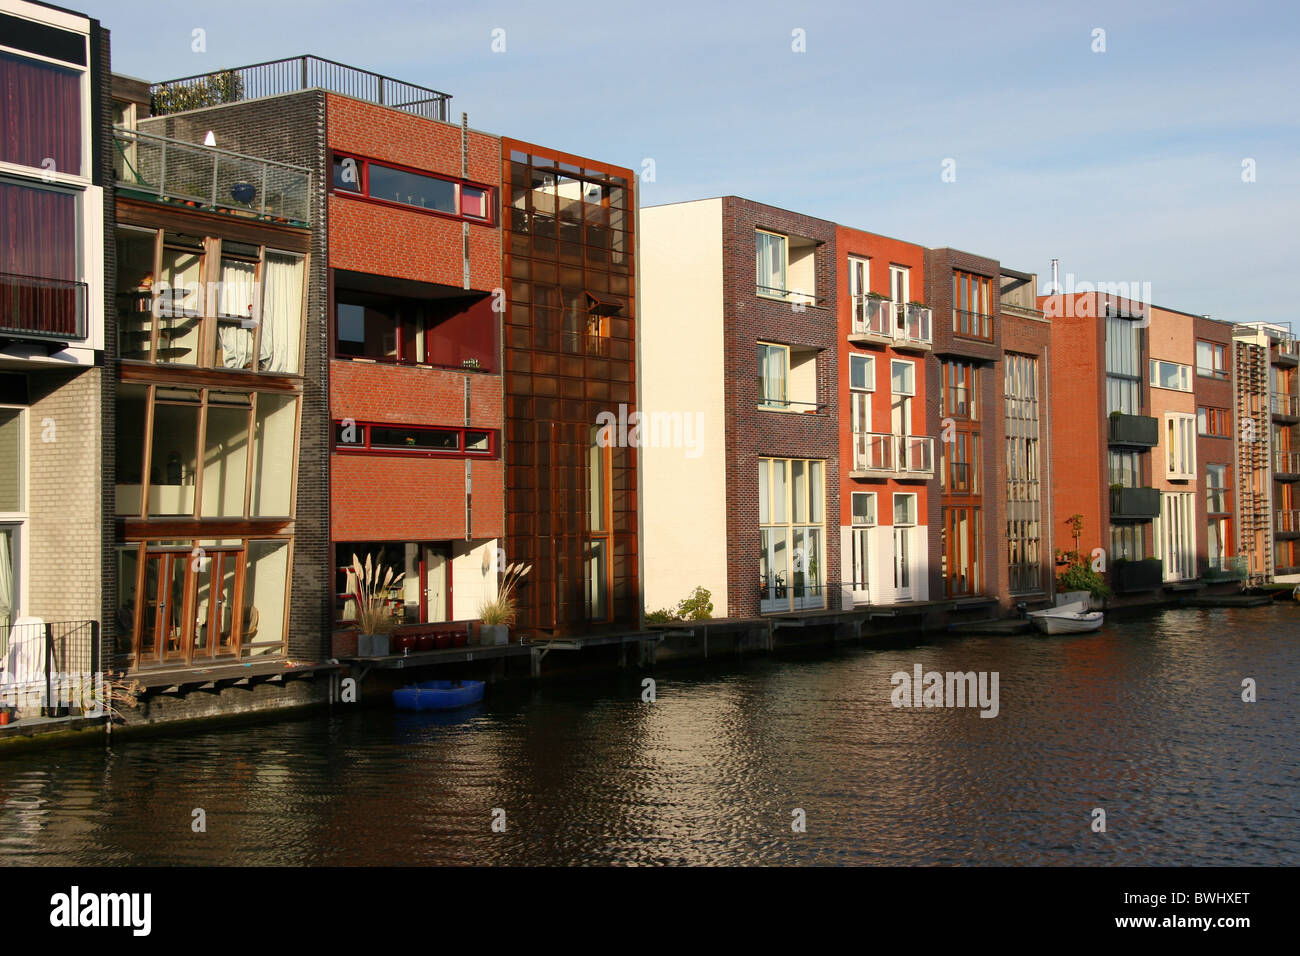 Holland Netherlands Holland Europe Amsterdam row of houses modern modern architecture Gracht canal water ca Stock Photo